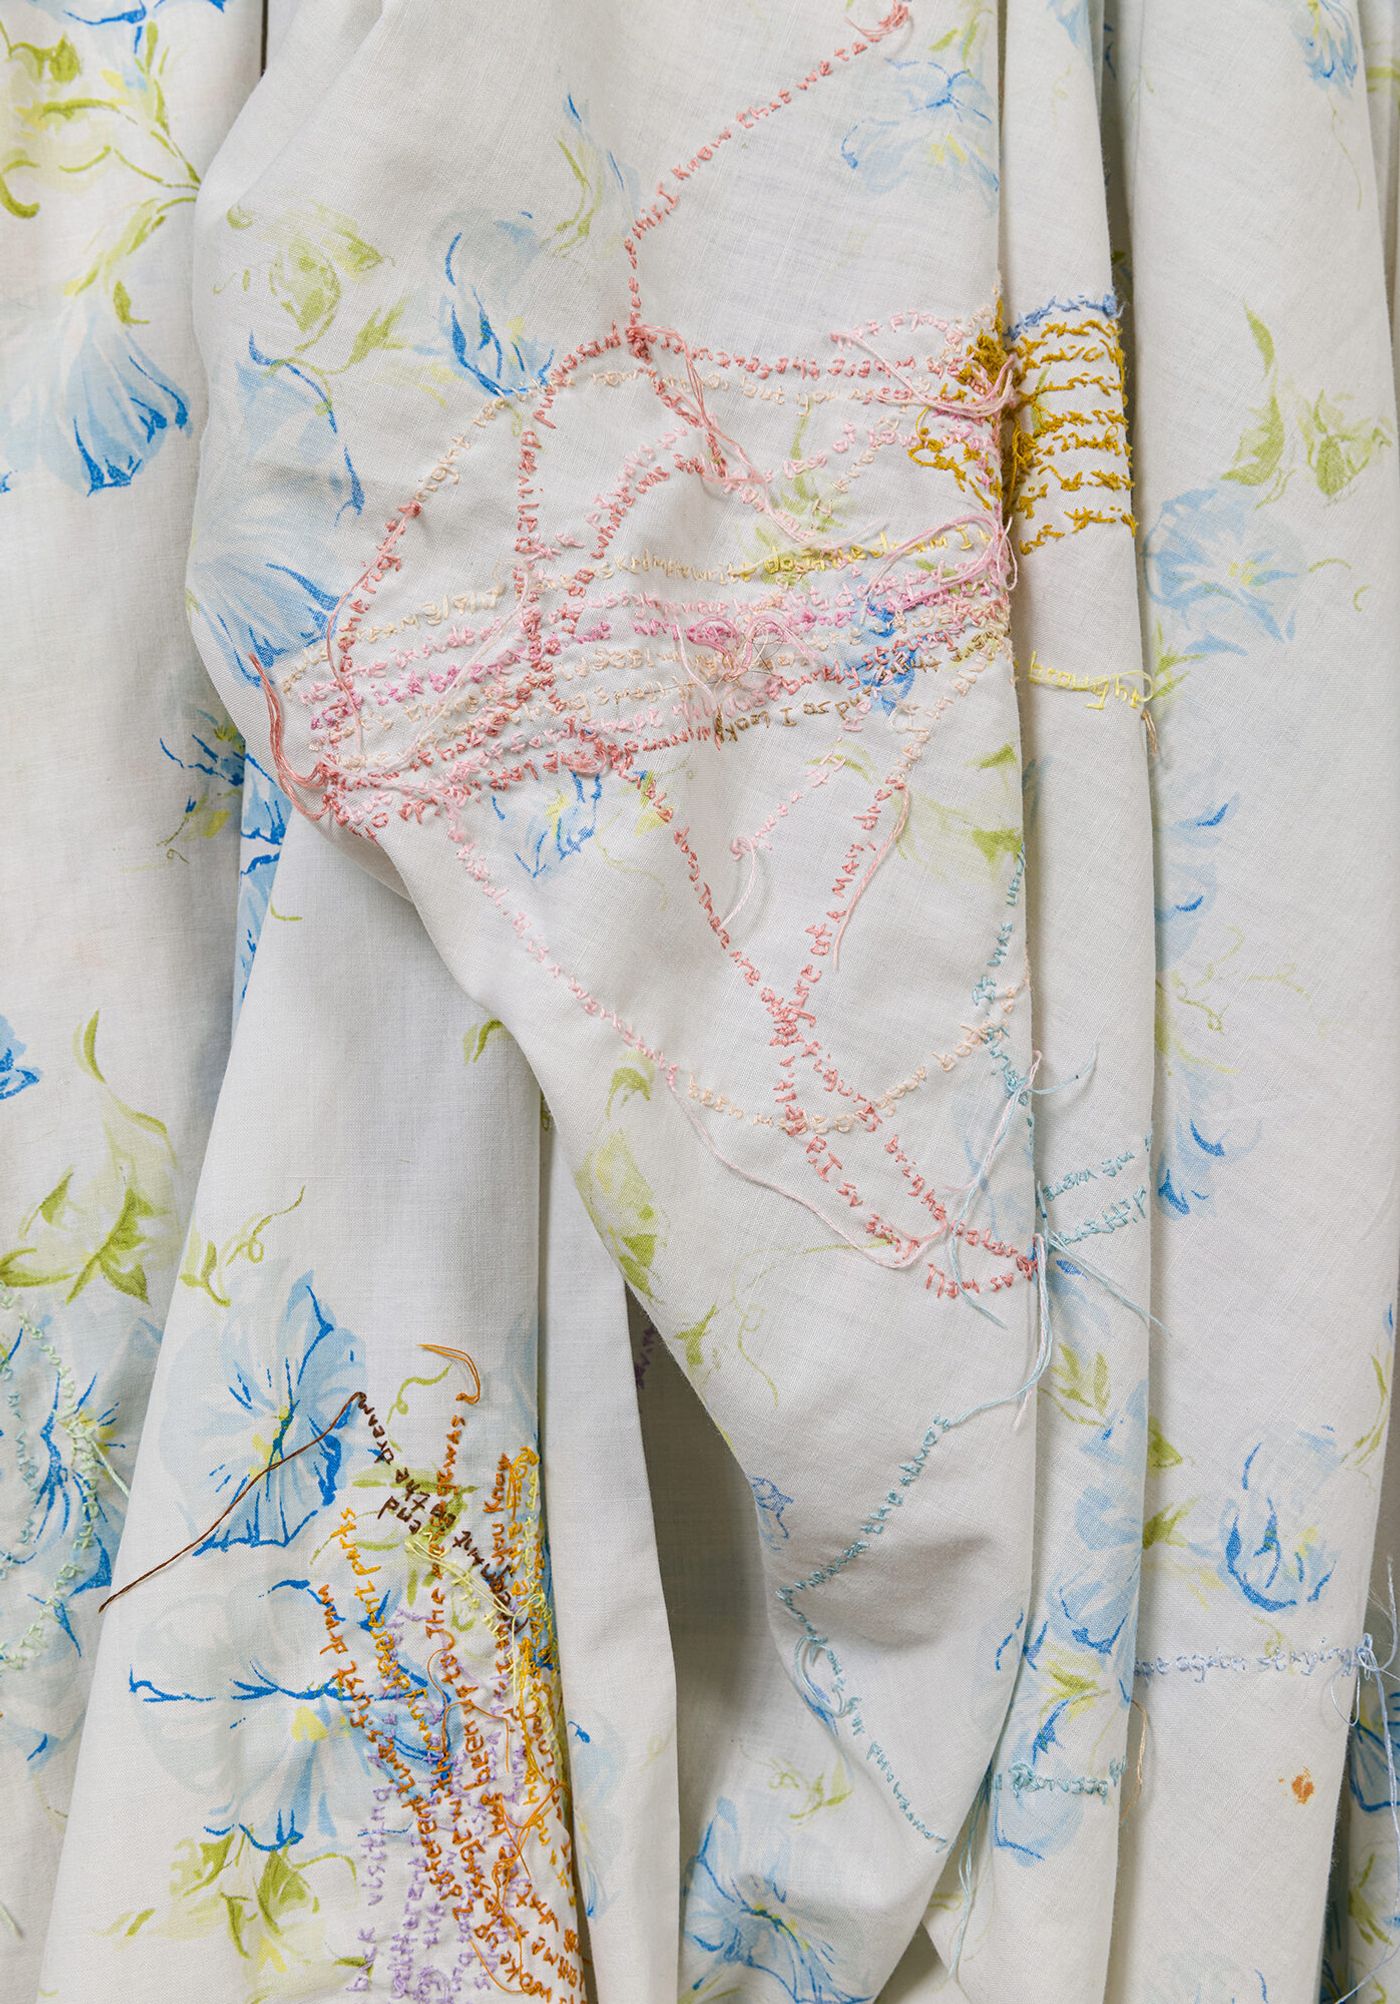 Dream Sheets (detail), 2013-ongoing. Bed sheets and thread; detail 7 x 12 in. Photo: Etienne Frossard.